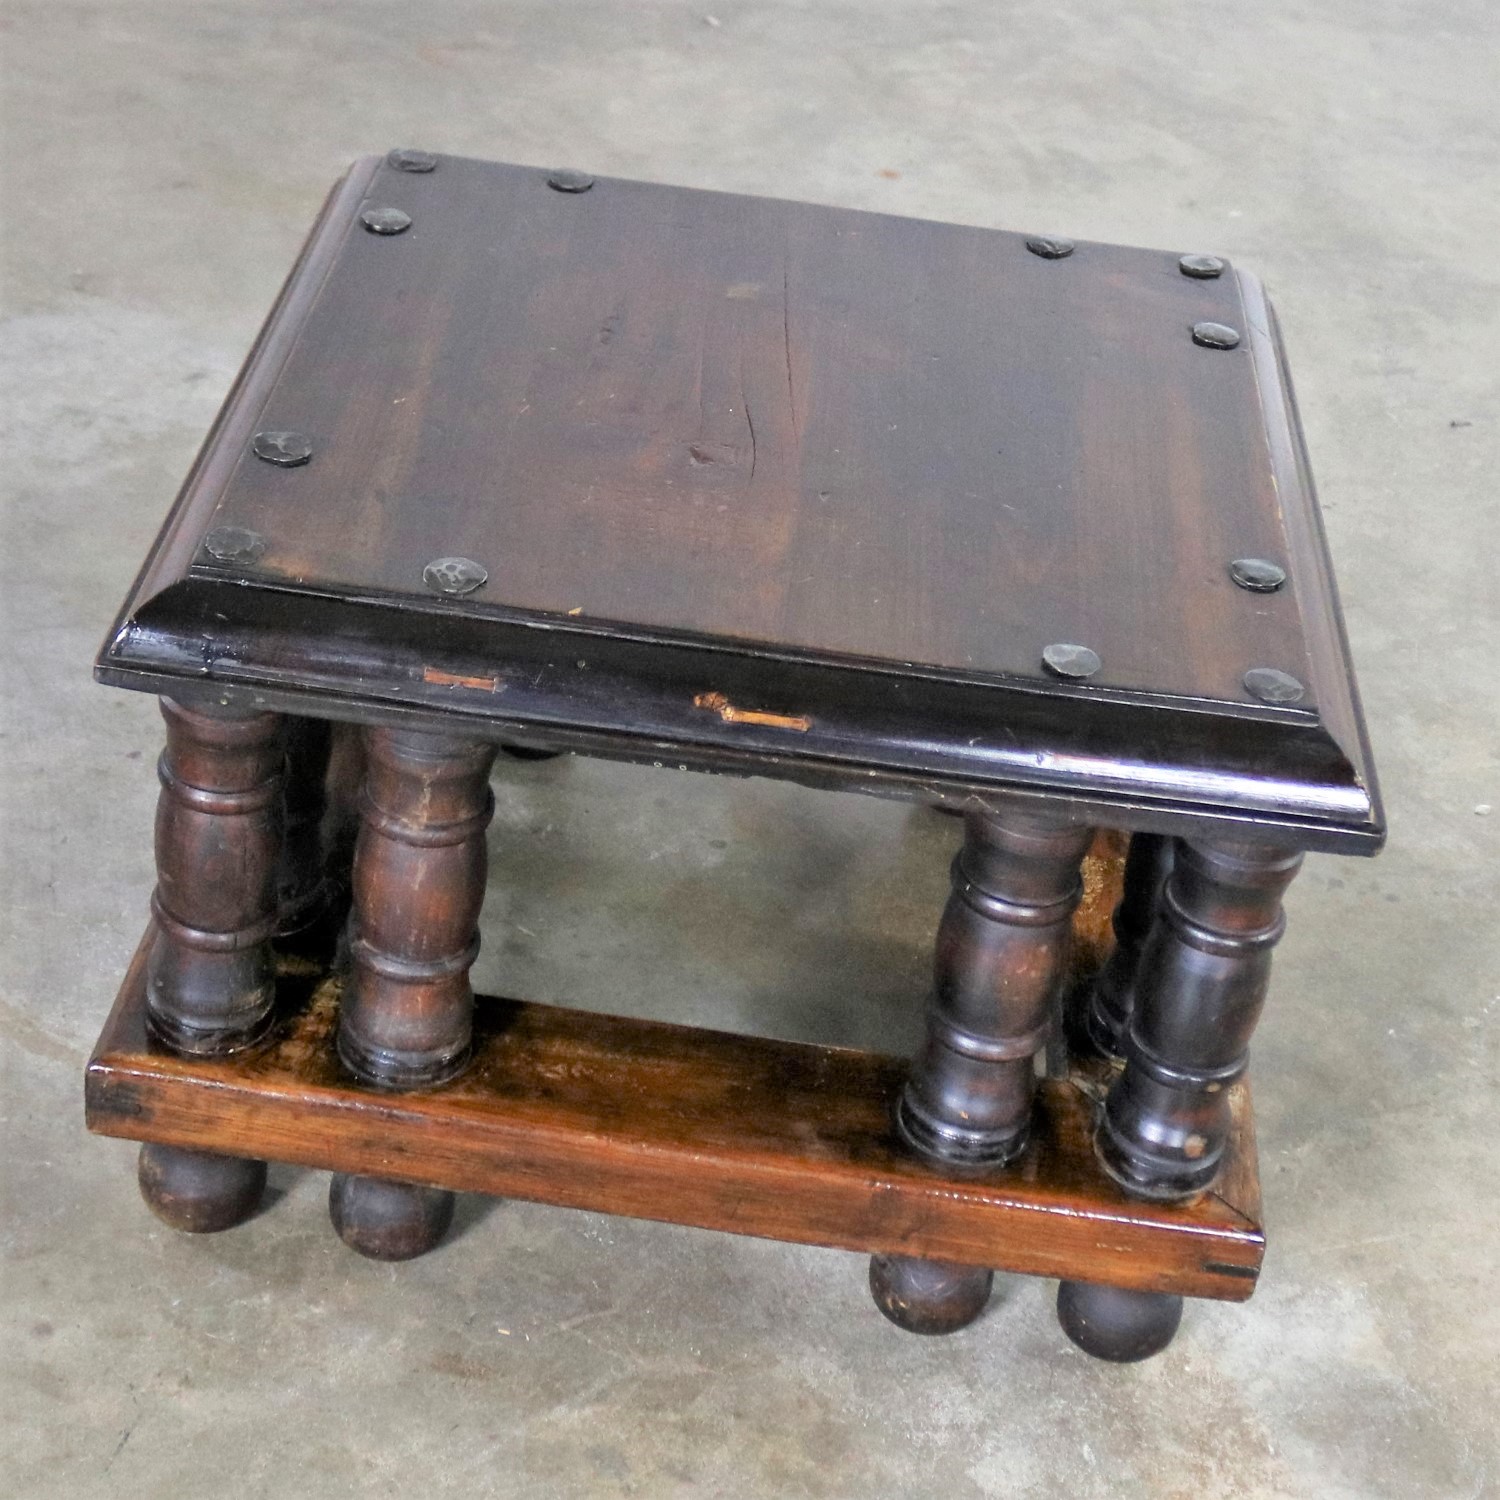 Spanish Revival Style Square End Table with Nail Heads by Artes De Mexico Internacionales, SA